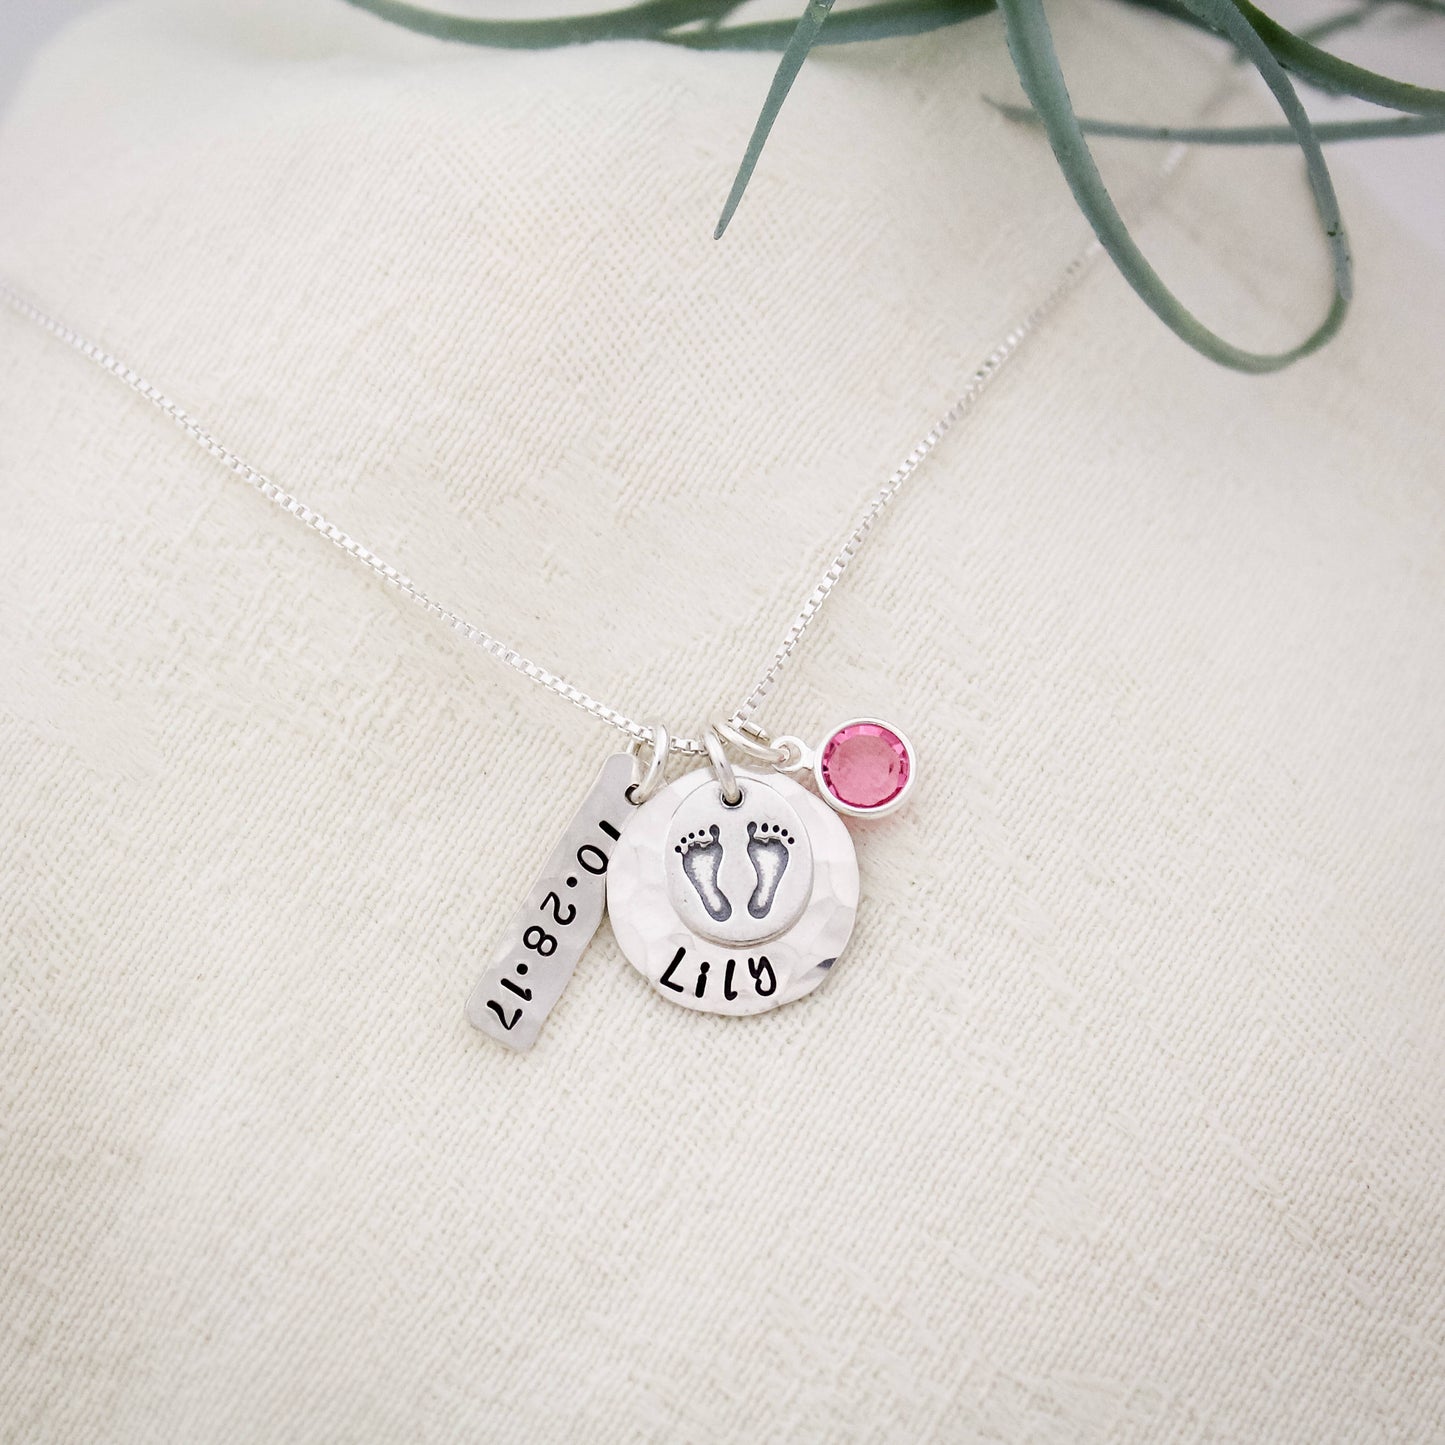 Personalized Baby Feet New Mommy Mom Necklace, Push Present, Mother's Day Gift, Gifts for Her, Hand Stamped Jewelry, Personalized Jewelry